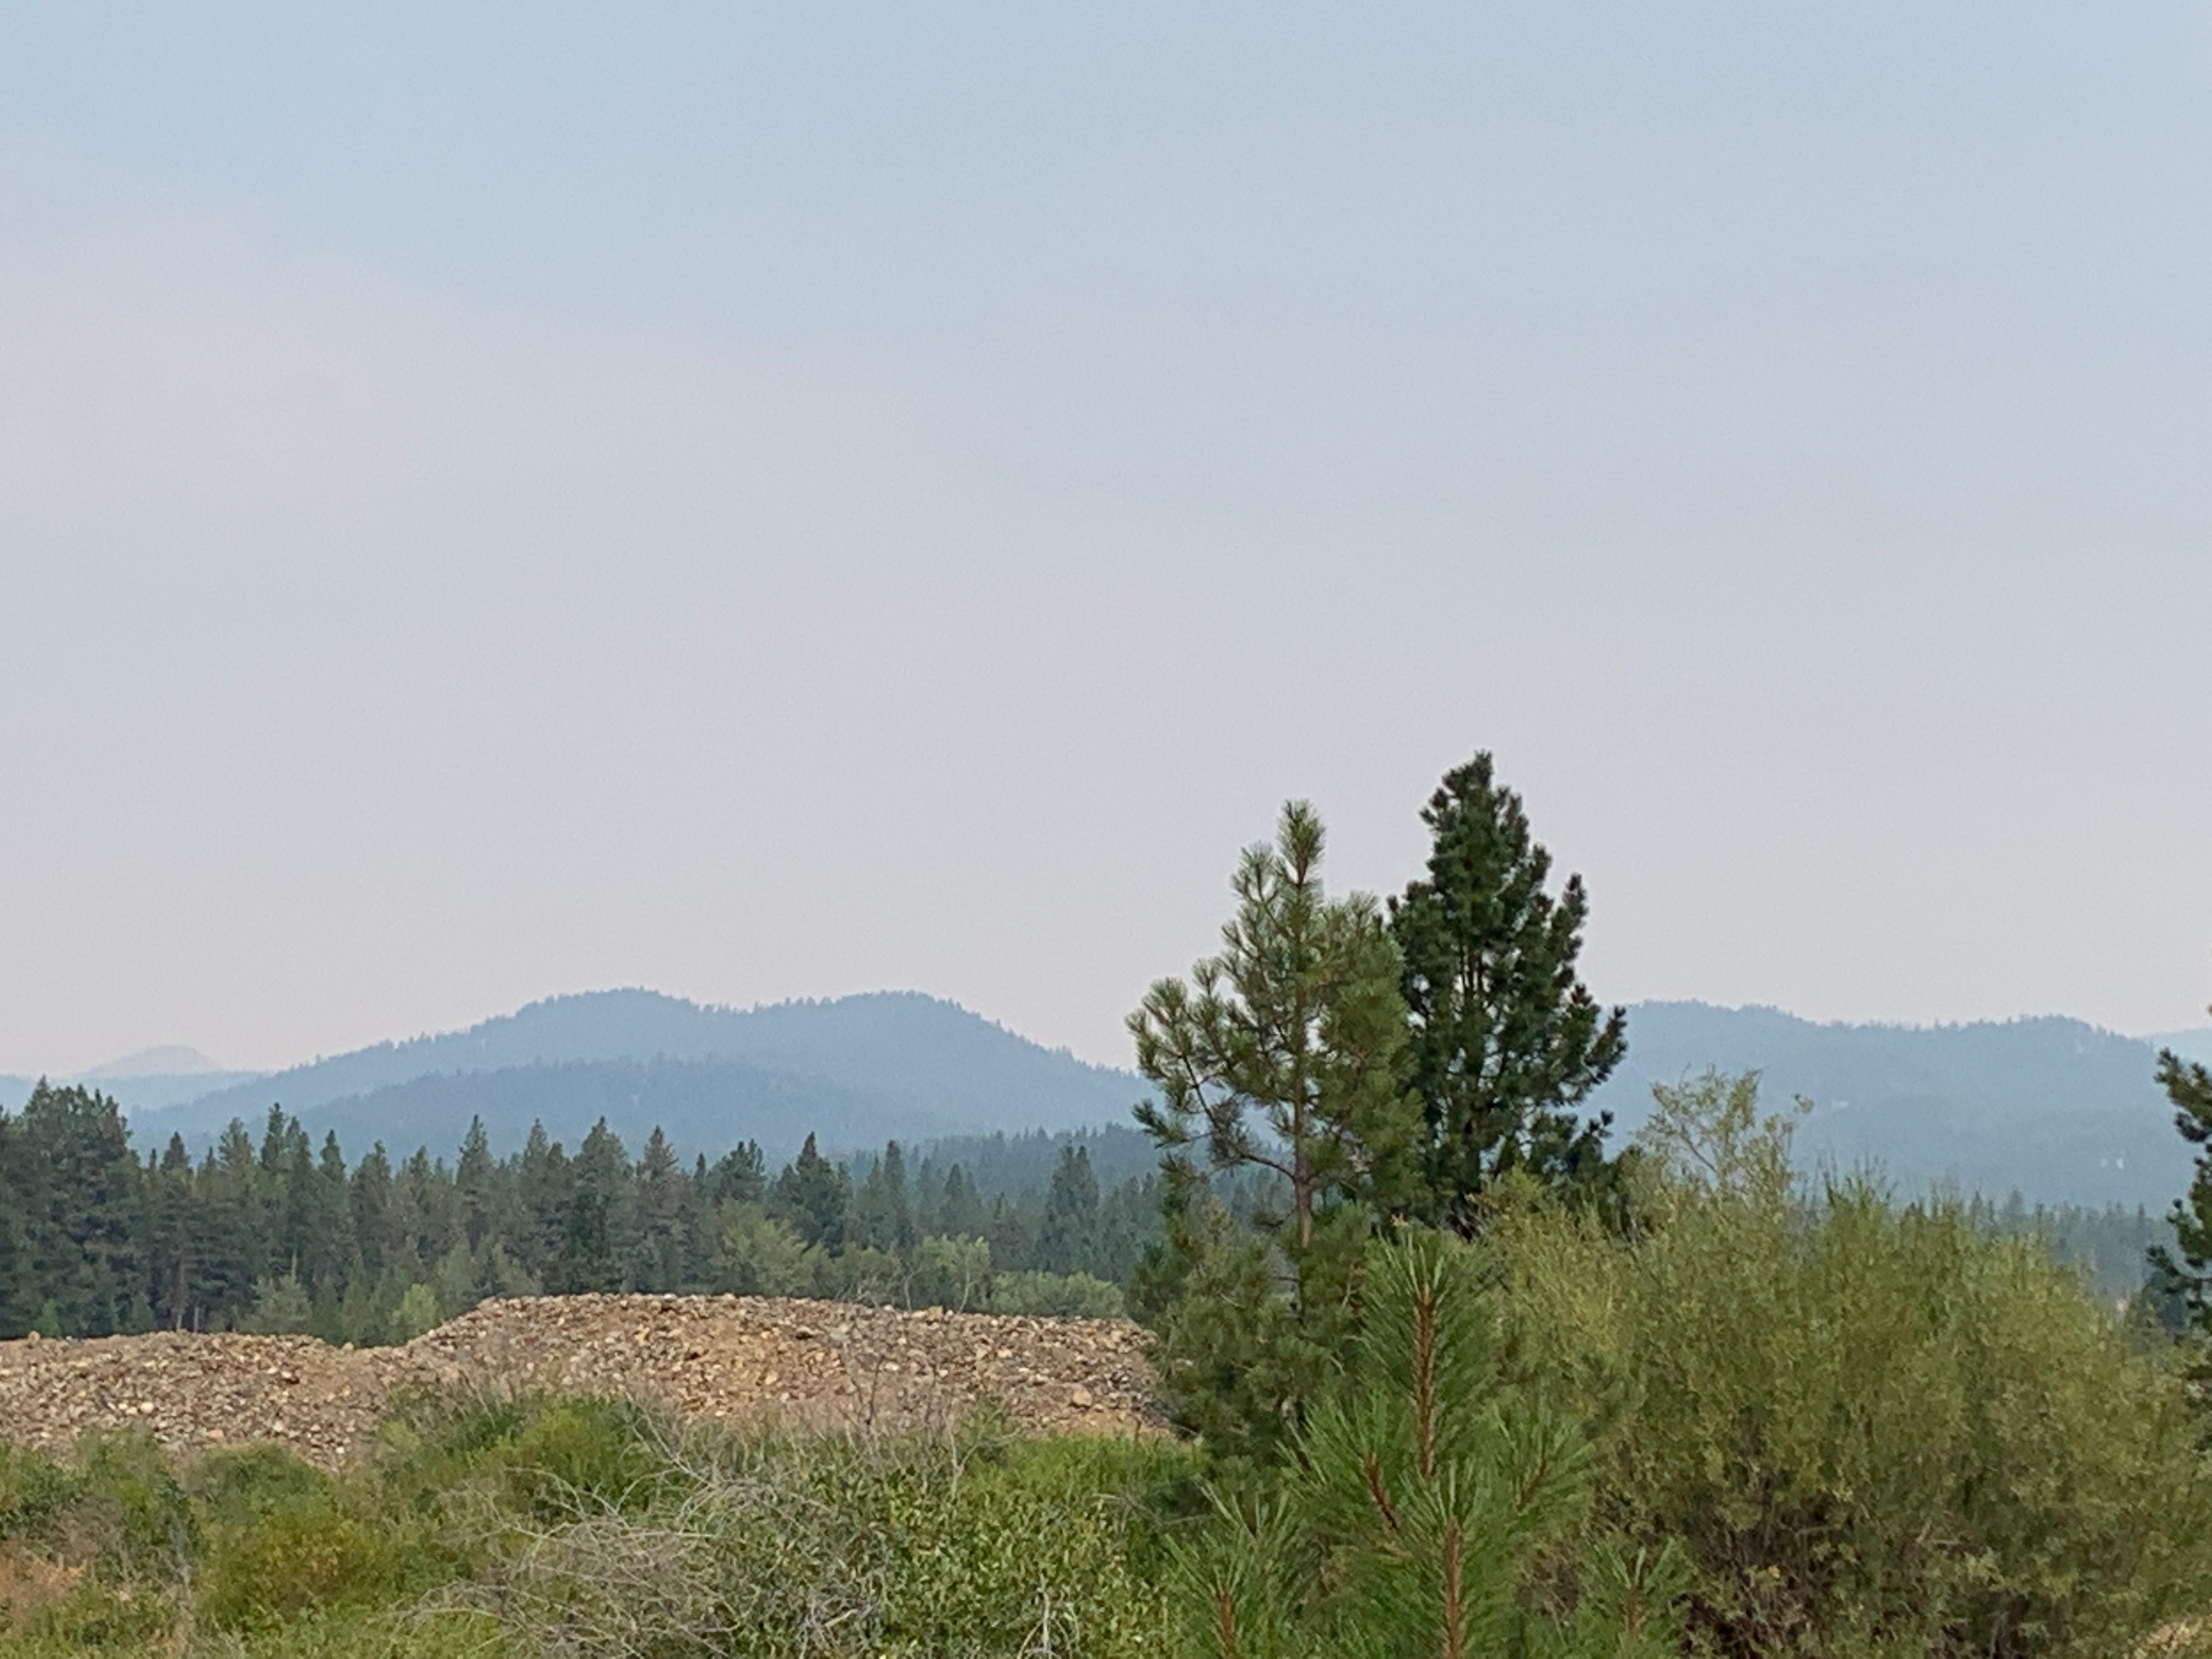 Smoke in the area, looking south from Sumpter, OR  on 09/03/22